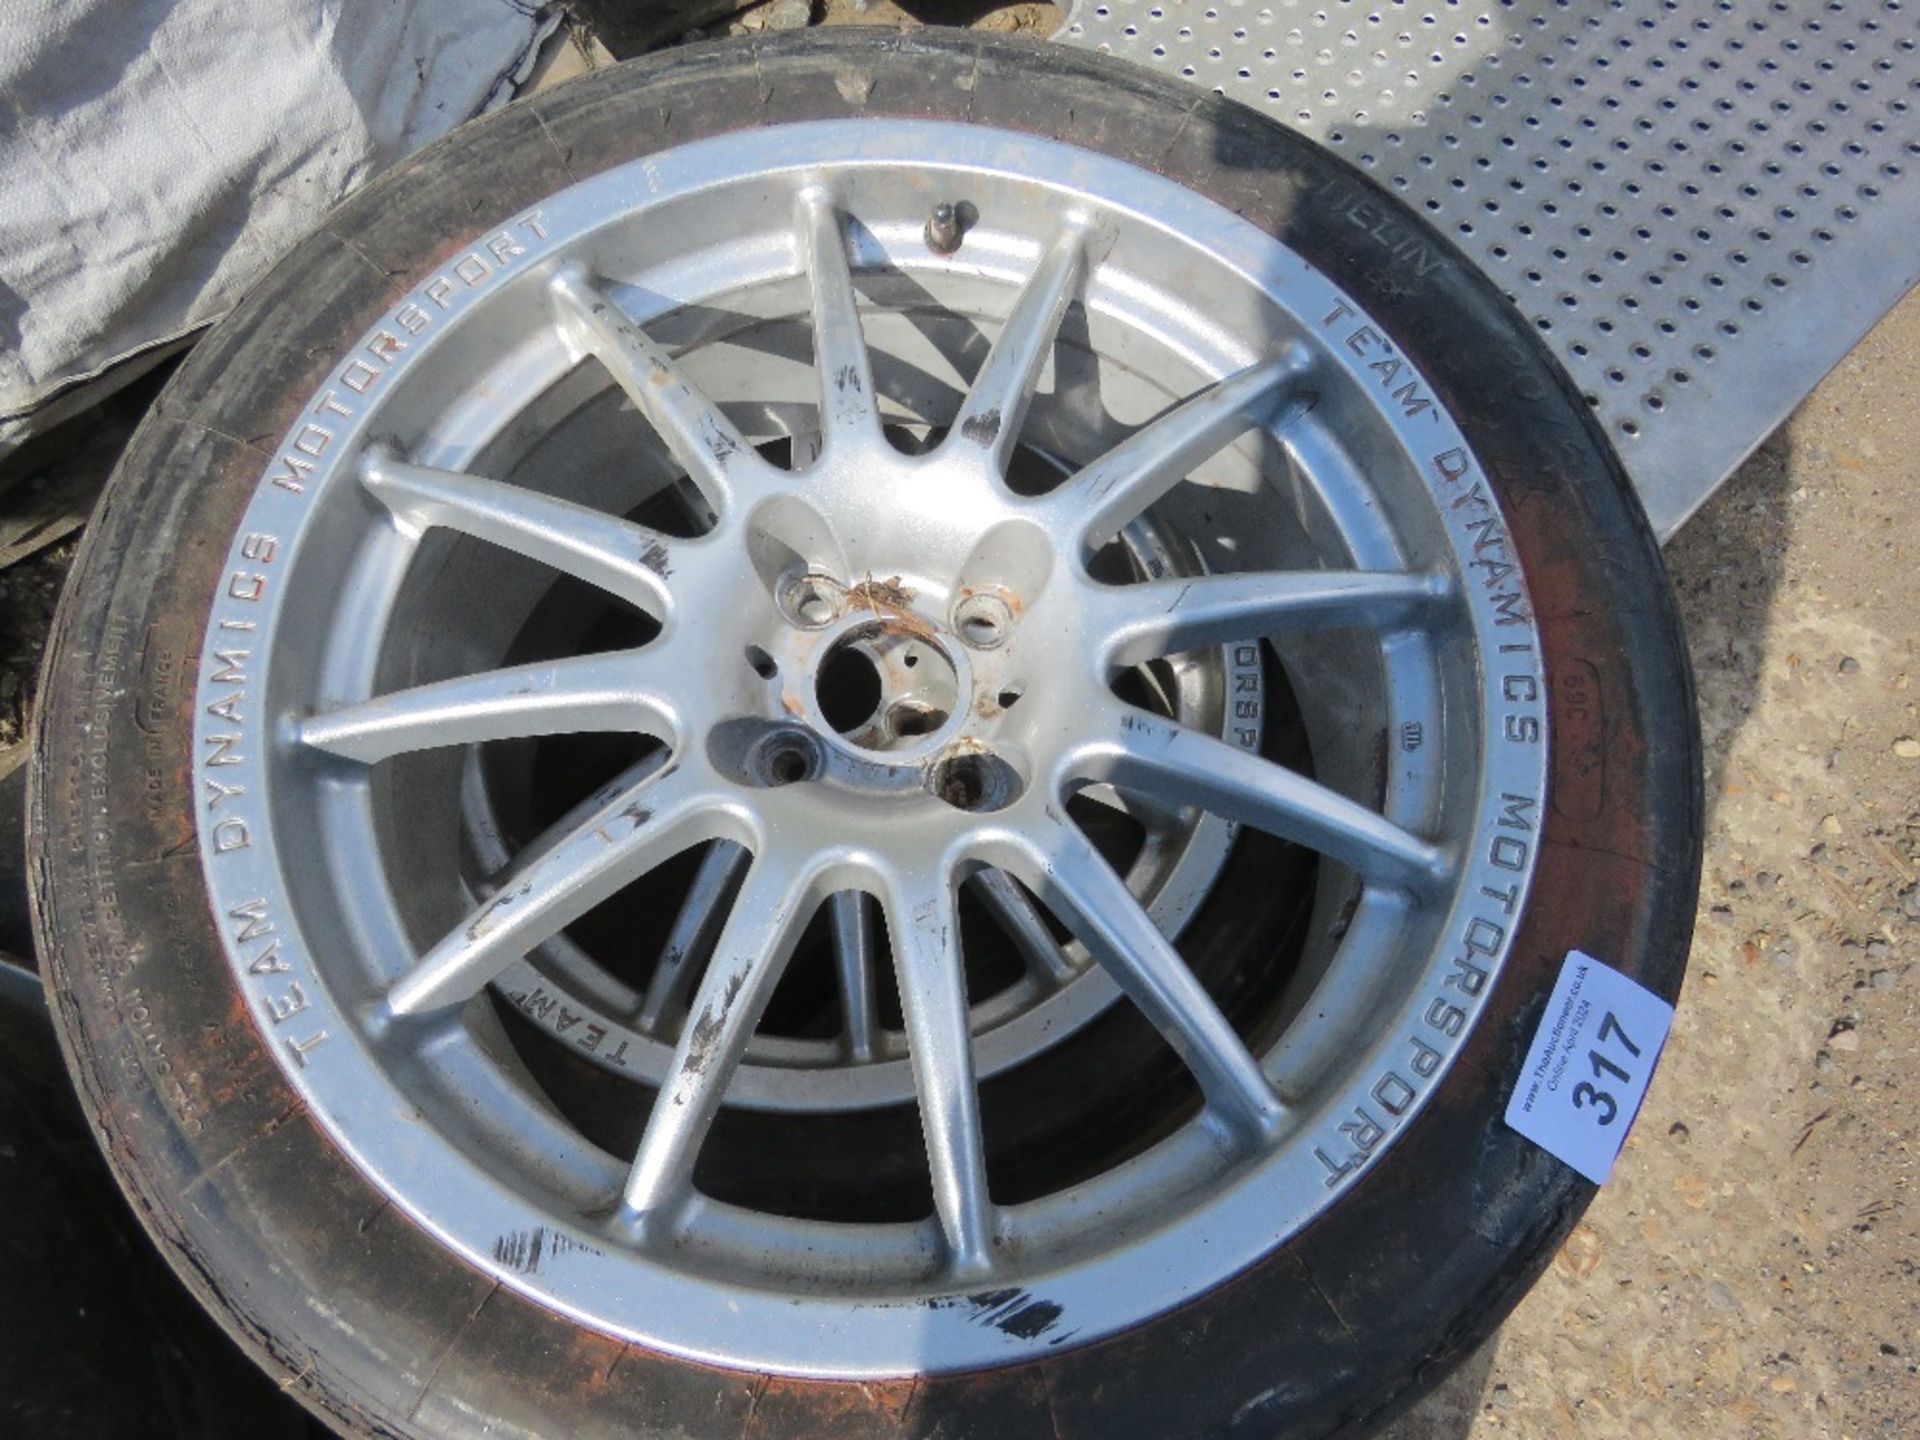 SET OF 4NO TEAM DYNAMICS MOTORSPORT RACING WHEELS AND TYRES, PREVIOUSLY USED ON AN ALFA ROMEO 33 RA - Image 6 of 8